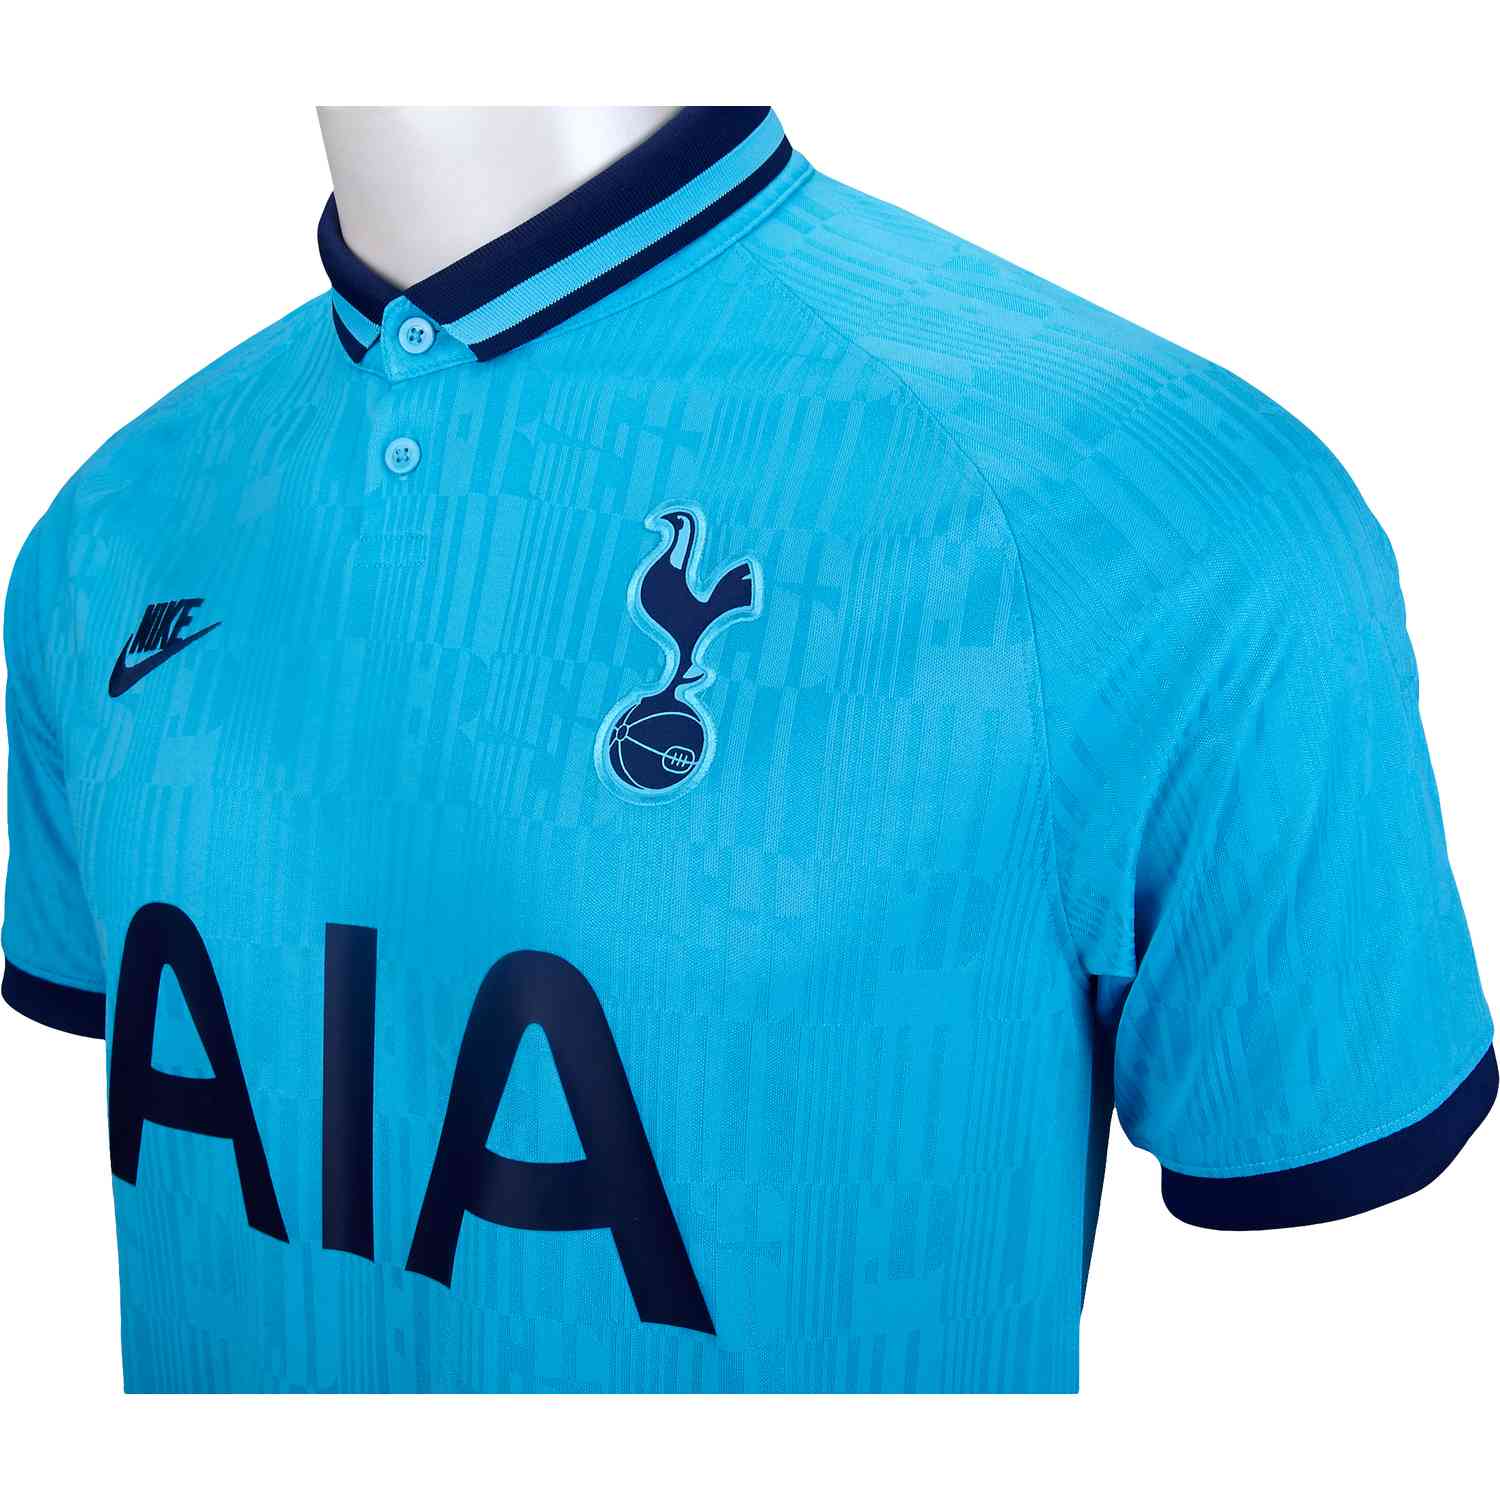 New Tottenham 2019/20 Nike kits: What we know so far about the home, away  and third shirts 